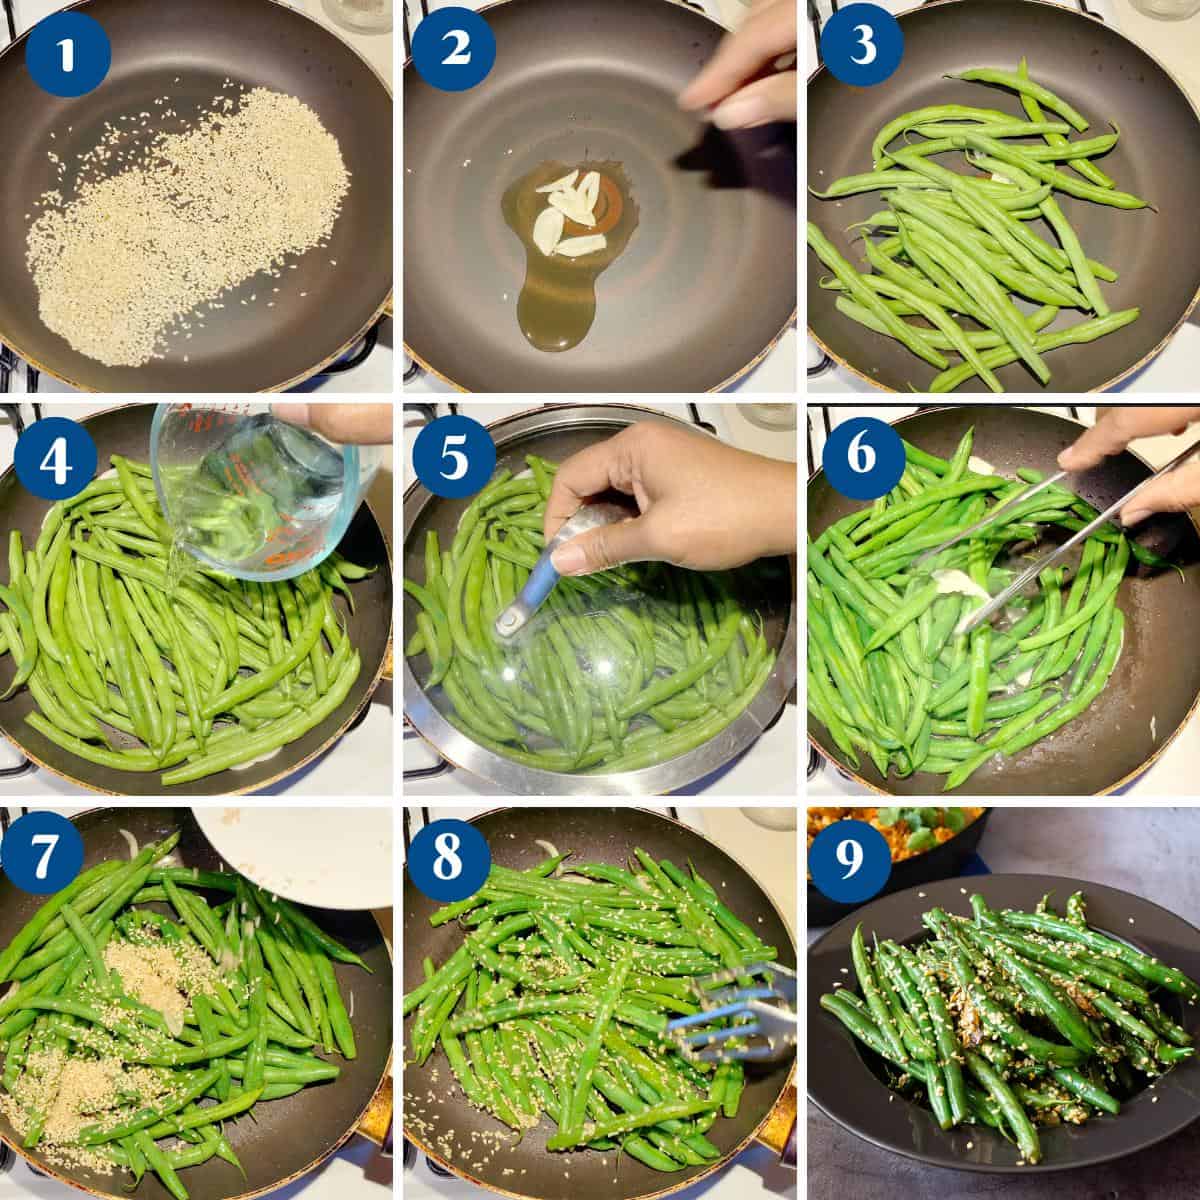 Progress pictures for making green beans.